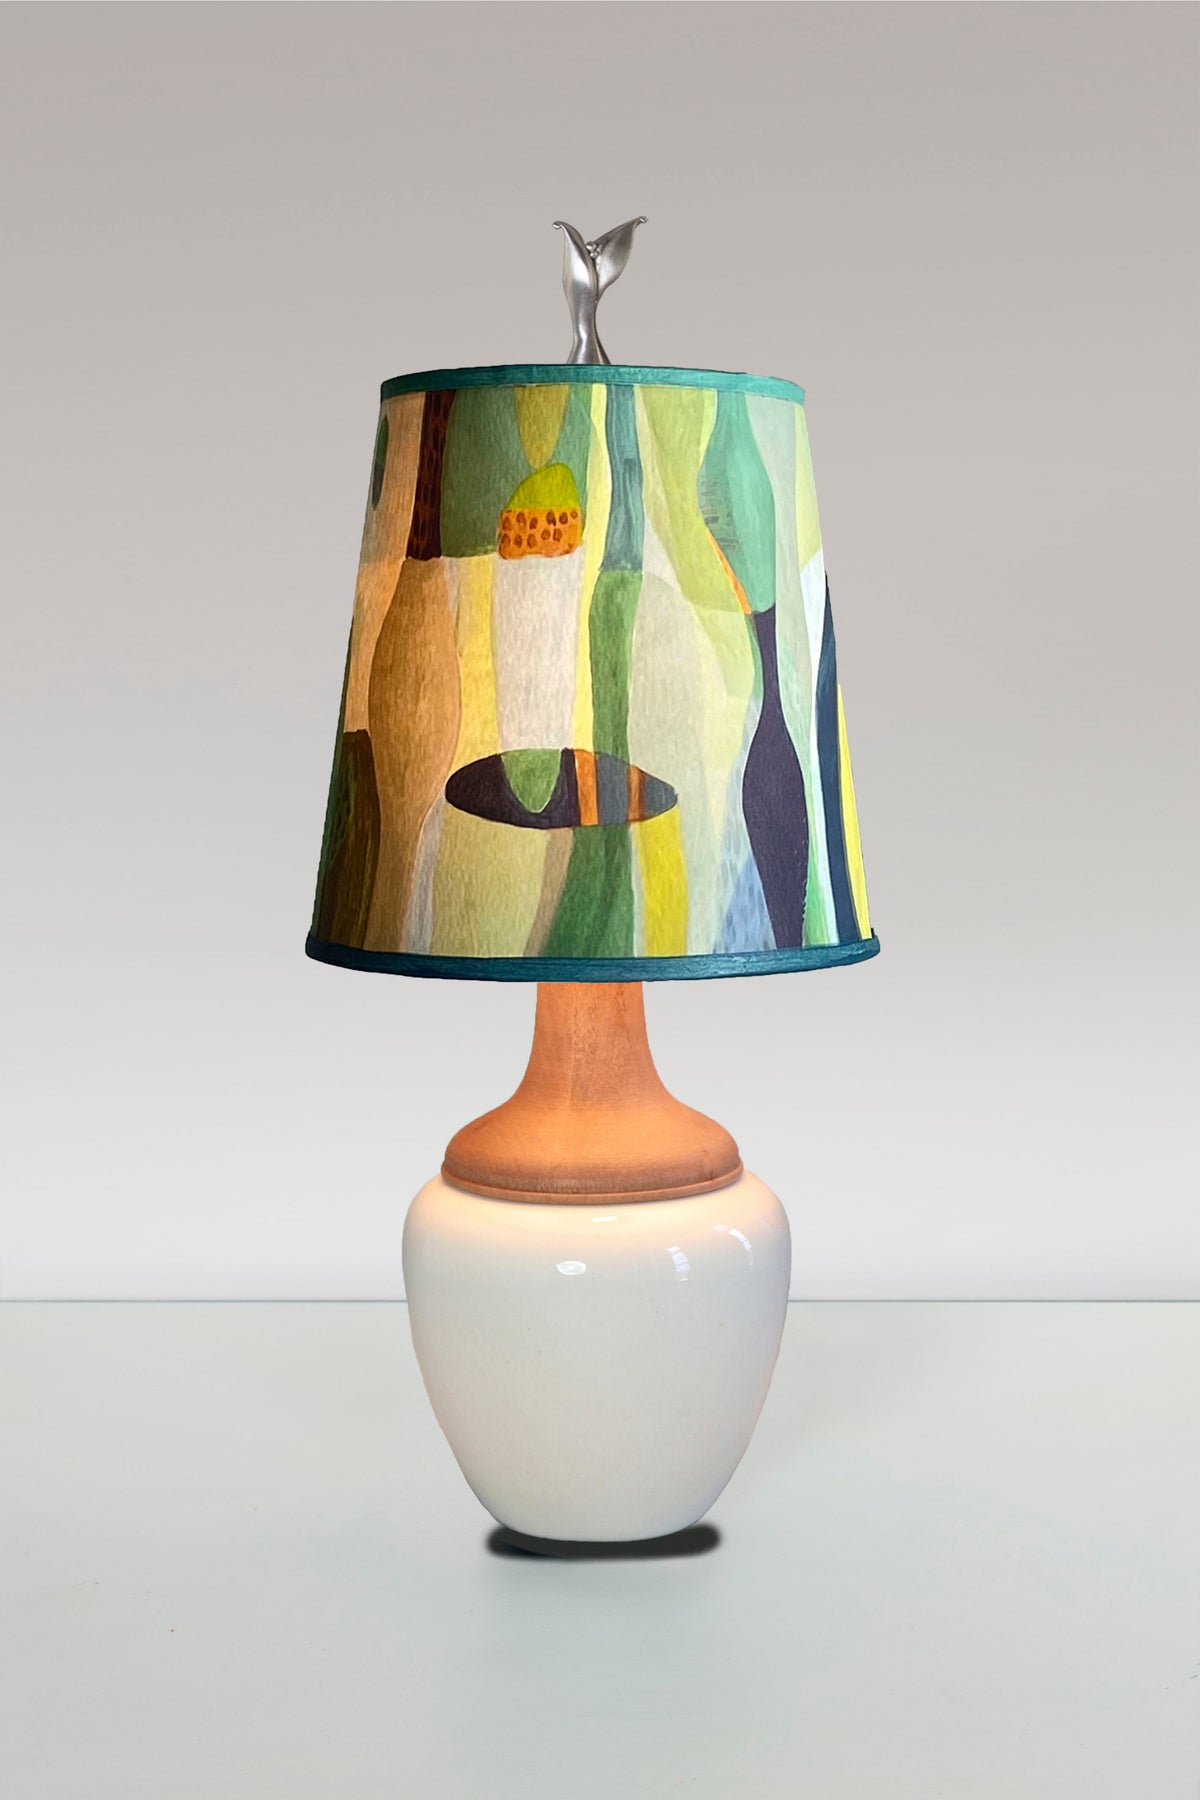 Ceramic and Maple Table Lamp in Ivory Gloss with Small Drum Shade in Riviera in Citrus